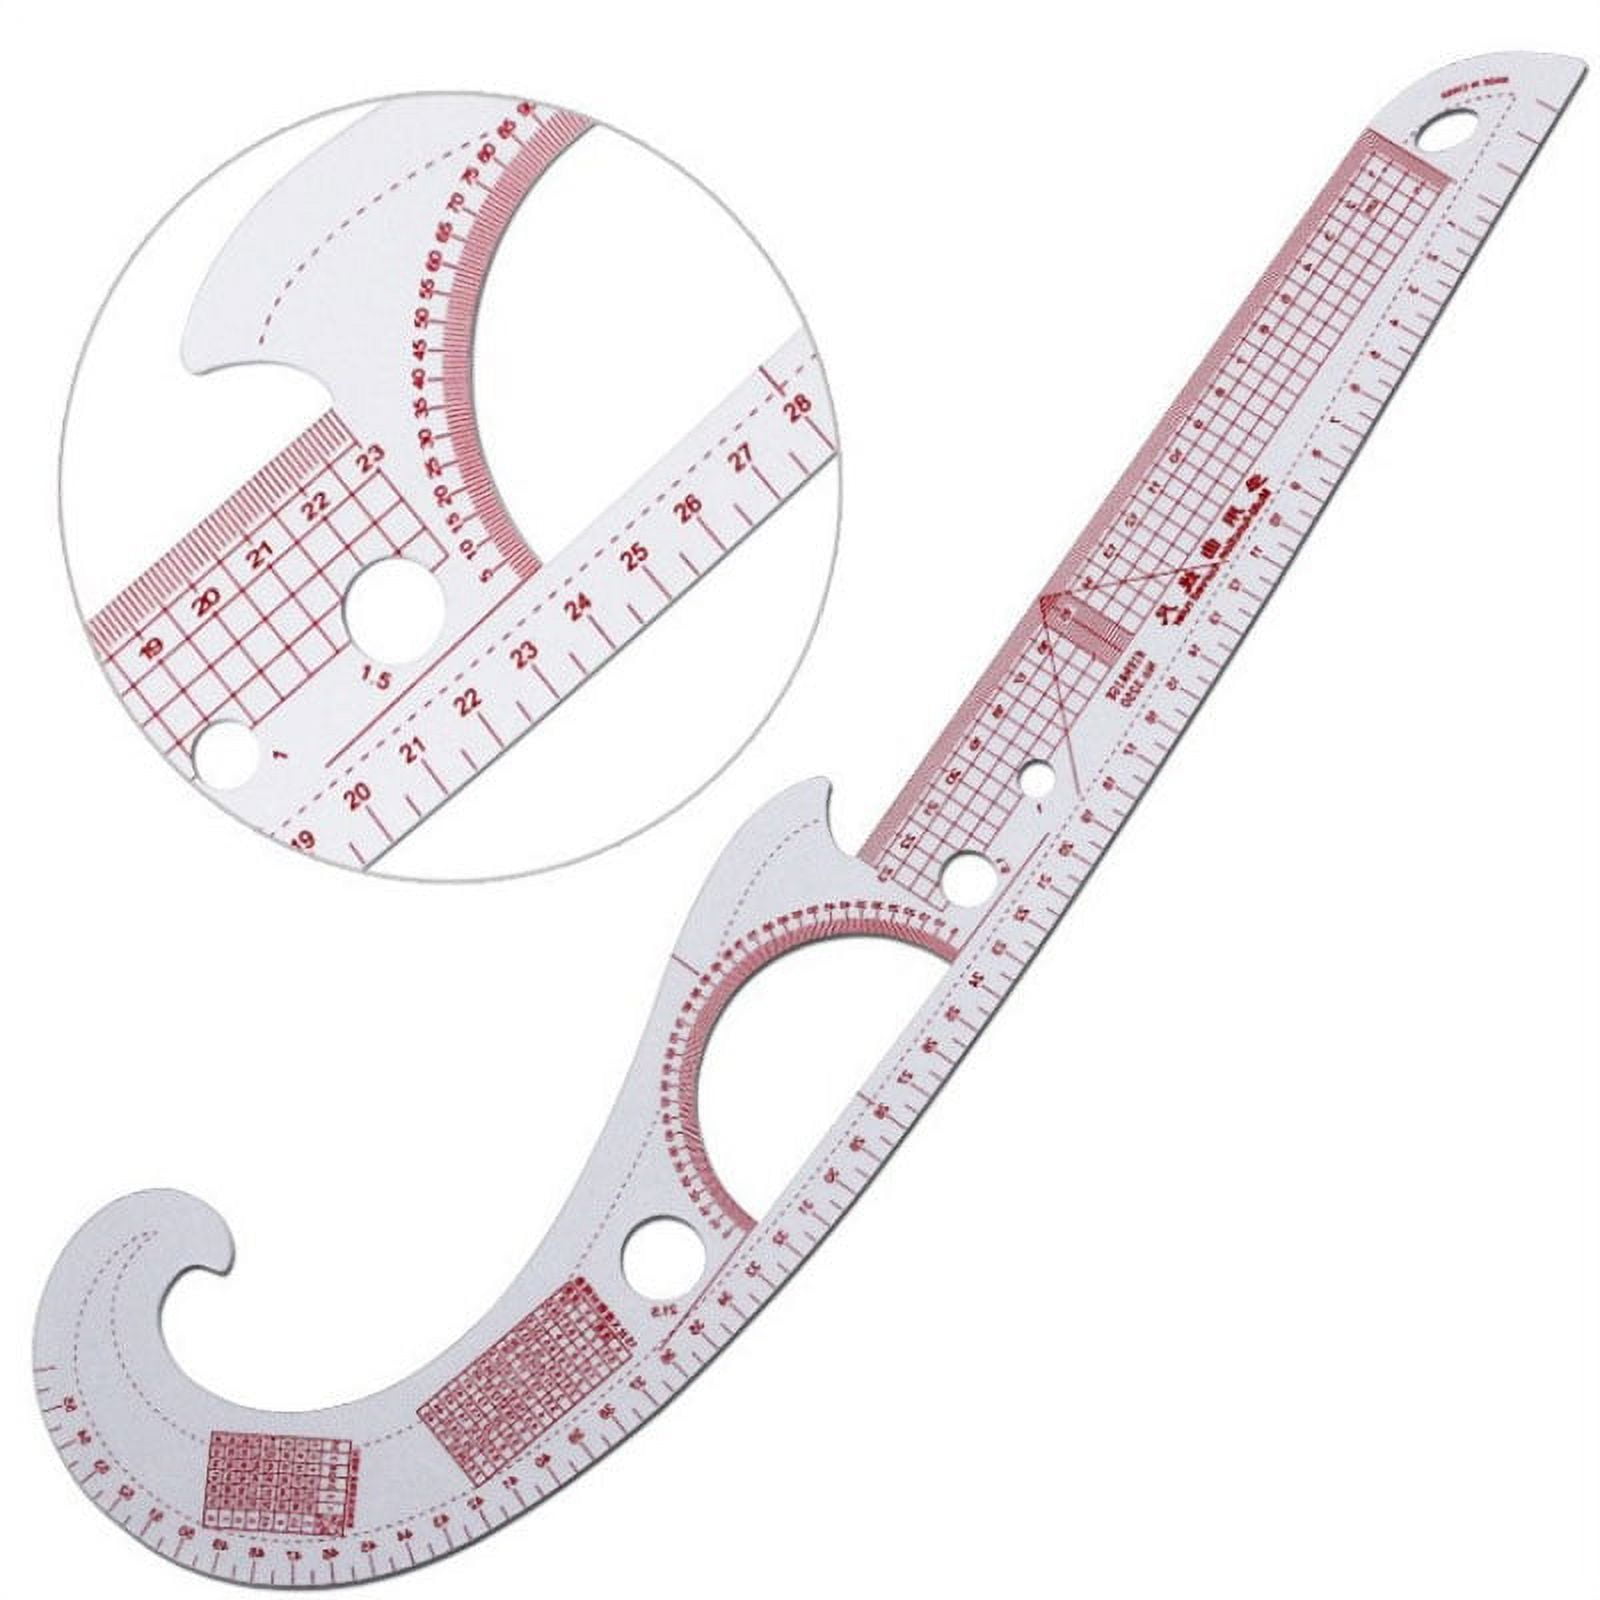 Multi-function Plastic French Curve Sewing Ruler Tailor Ruler Design Making  Clothing 360 Degree Bend Ruler Measure Tools